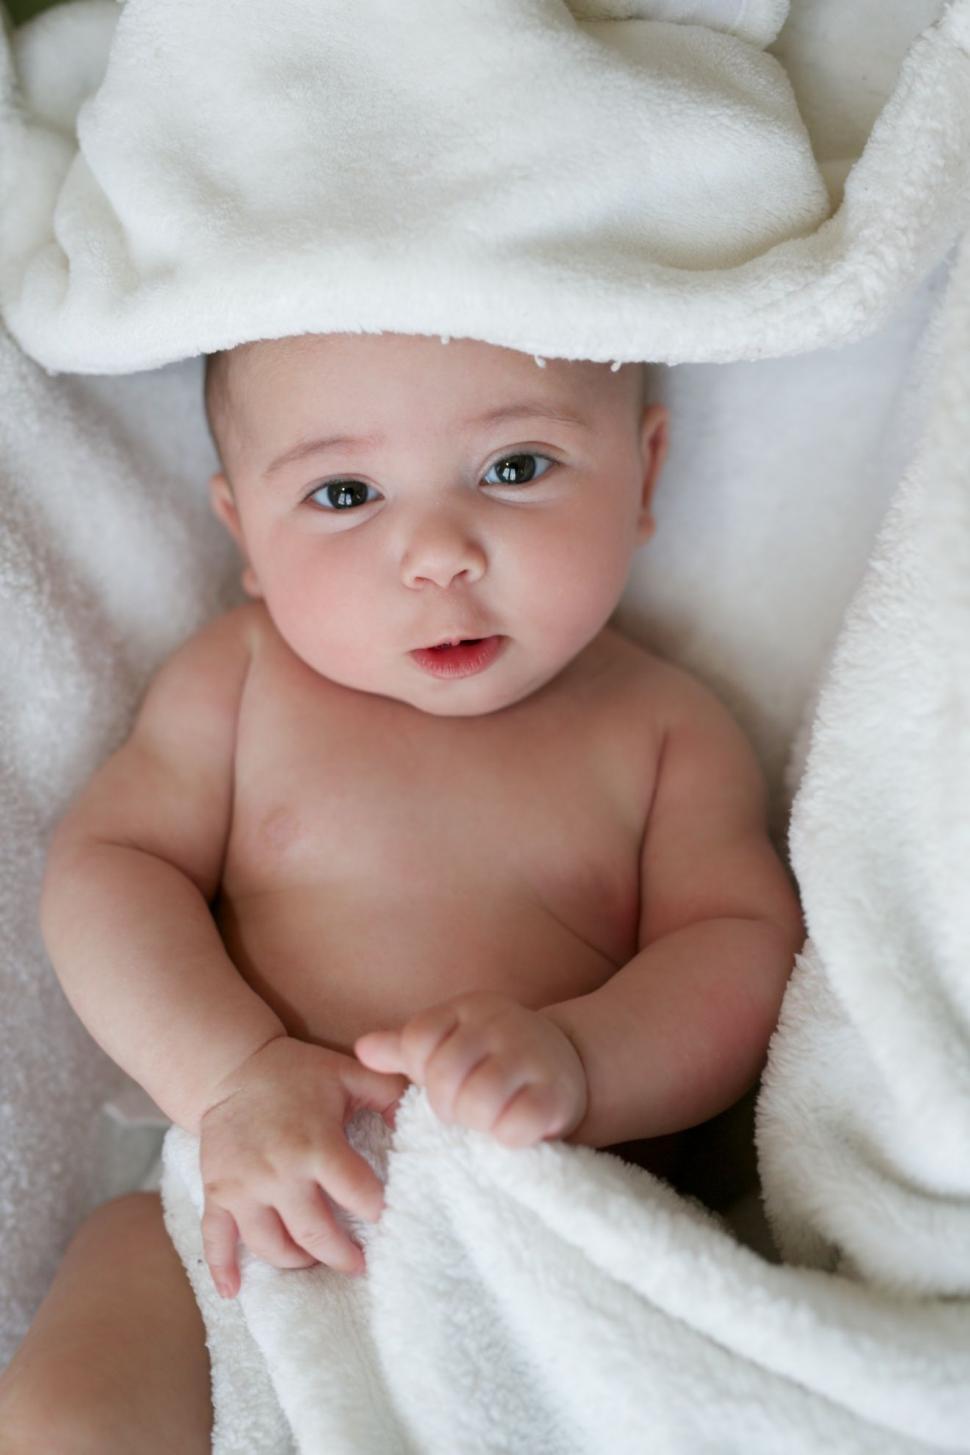 Download Free Stock Photo of Baby Boy looking at camera  